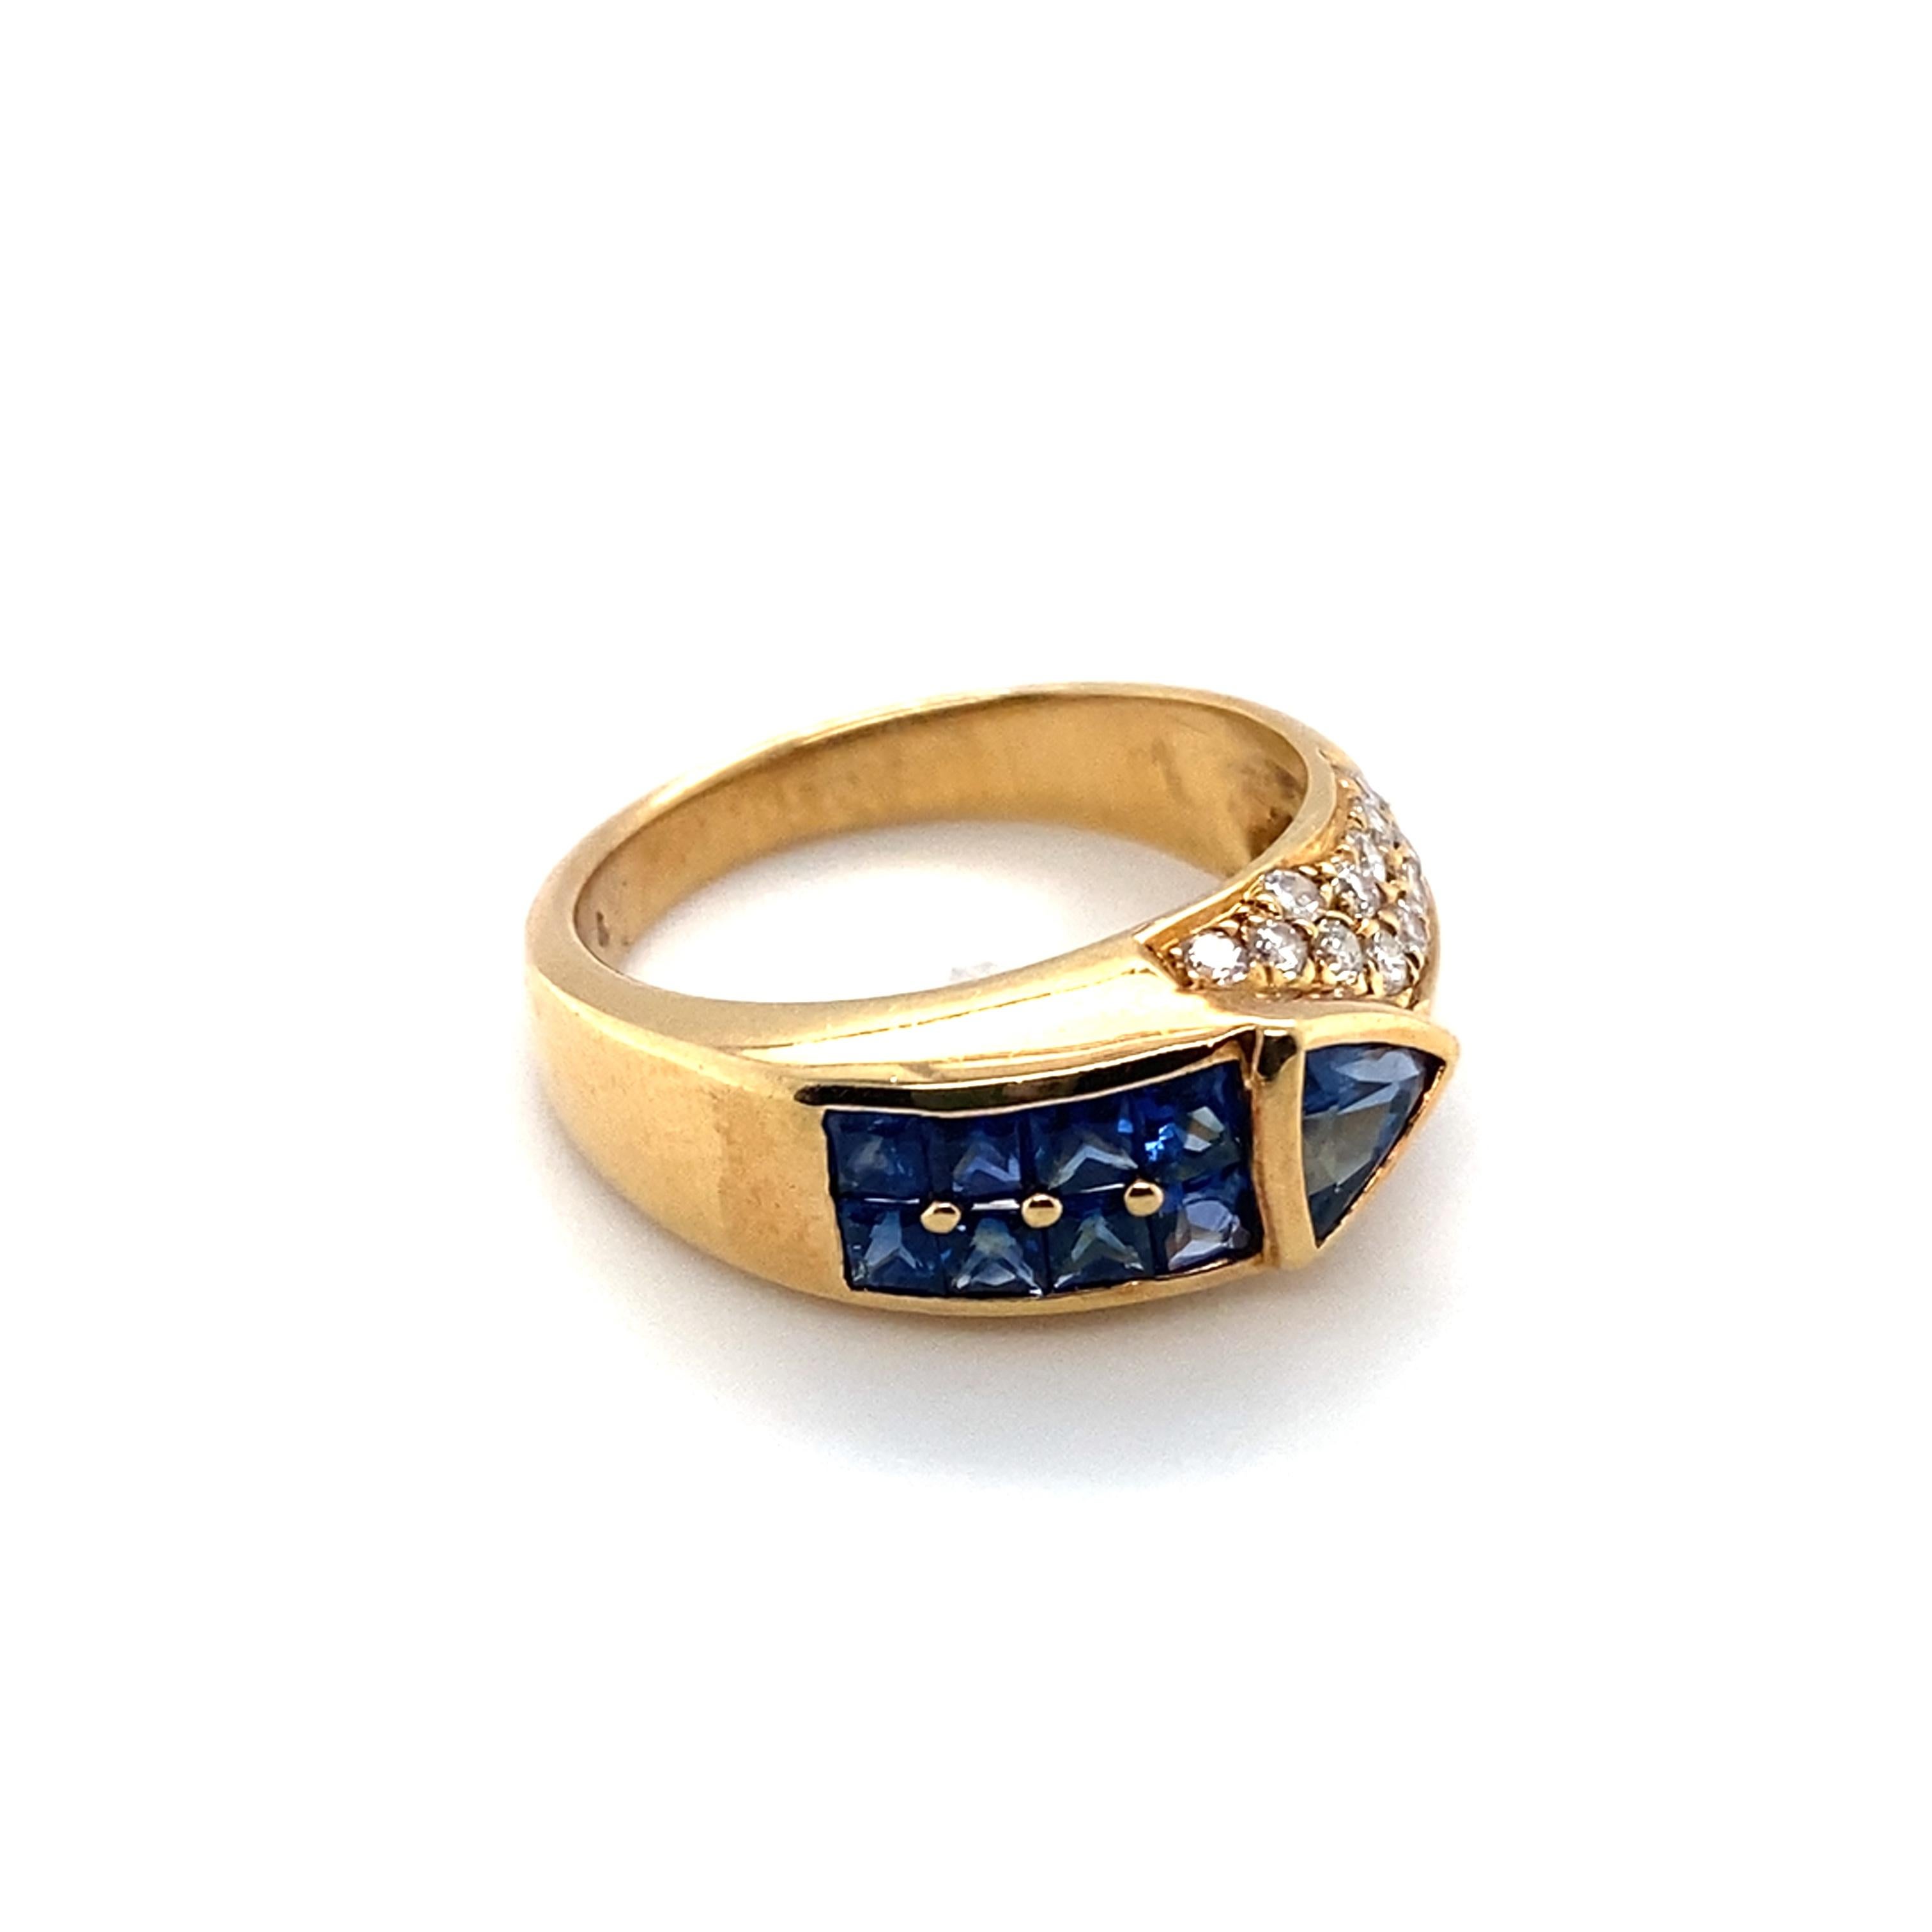 Item Details: 
Gemstone: Sapphire & Diamond
Metal: 18 Karat Yellow Gold
Weight: 6.4 grams
Size: 6, can be resized 

Sapphire Details:
Carat: .75 carats 
Color: Royal Blue 

Diamond Details: 
Carat: .50 carats
Cut: Round Brilliance 
Color: G